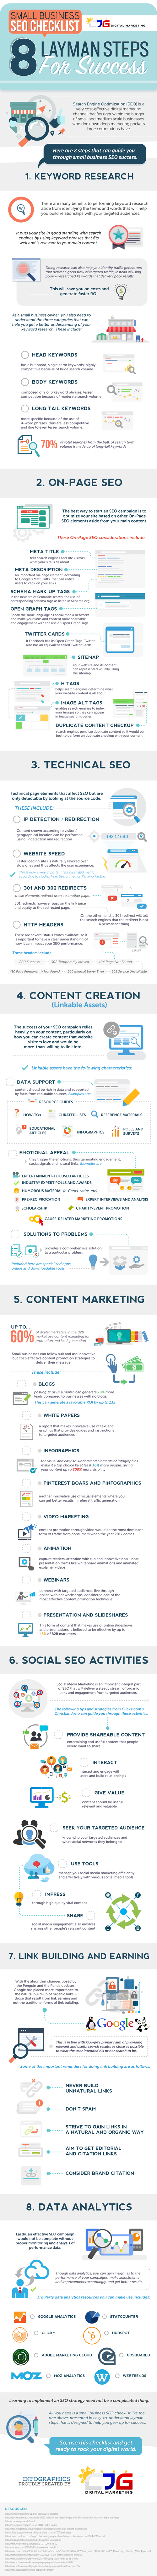 Small Business SEO Checklist – 8 Layman Steps for Success (Infographic) - An Infographic from CJG Digital Marketing